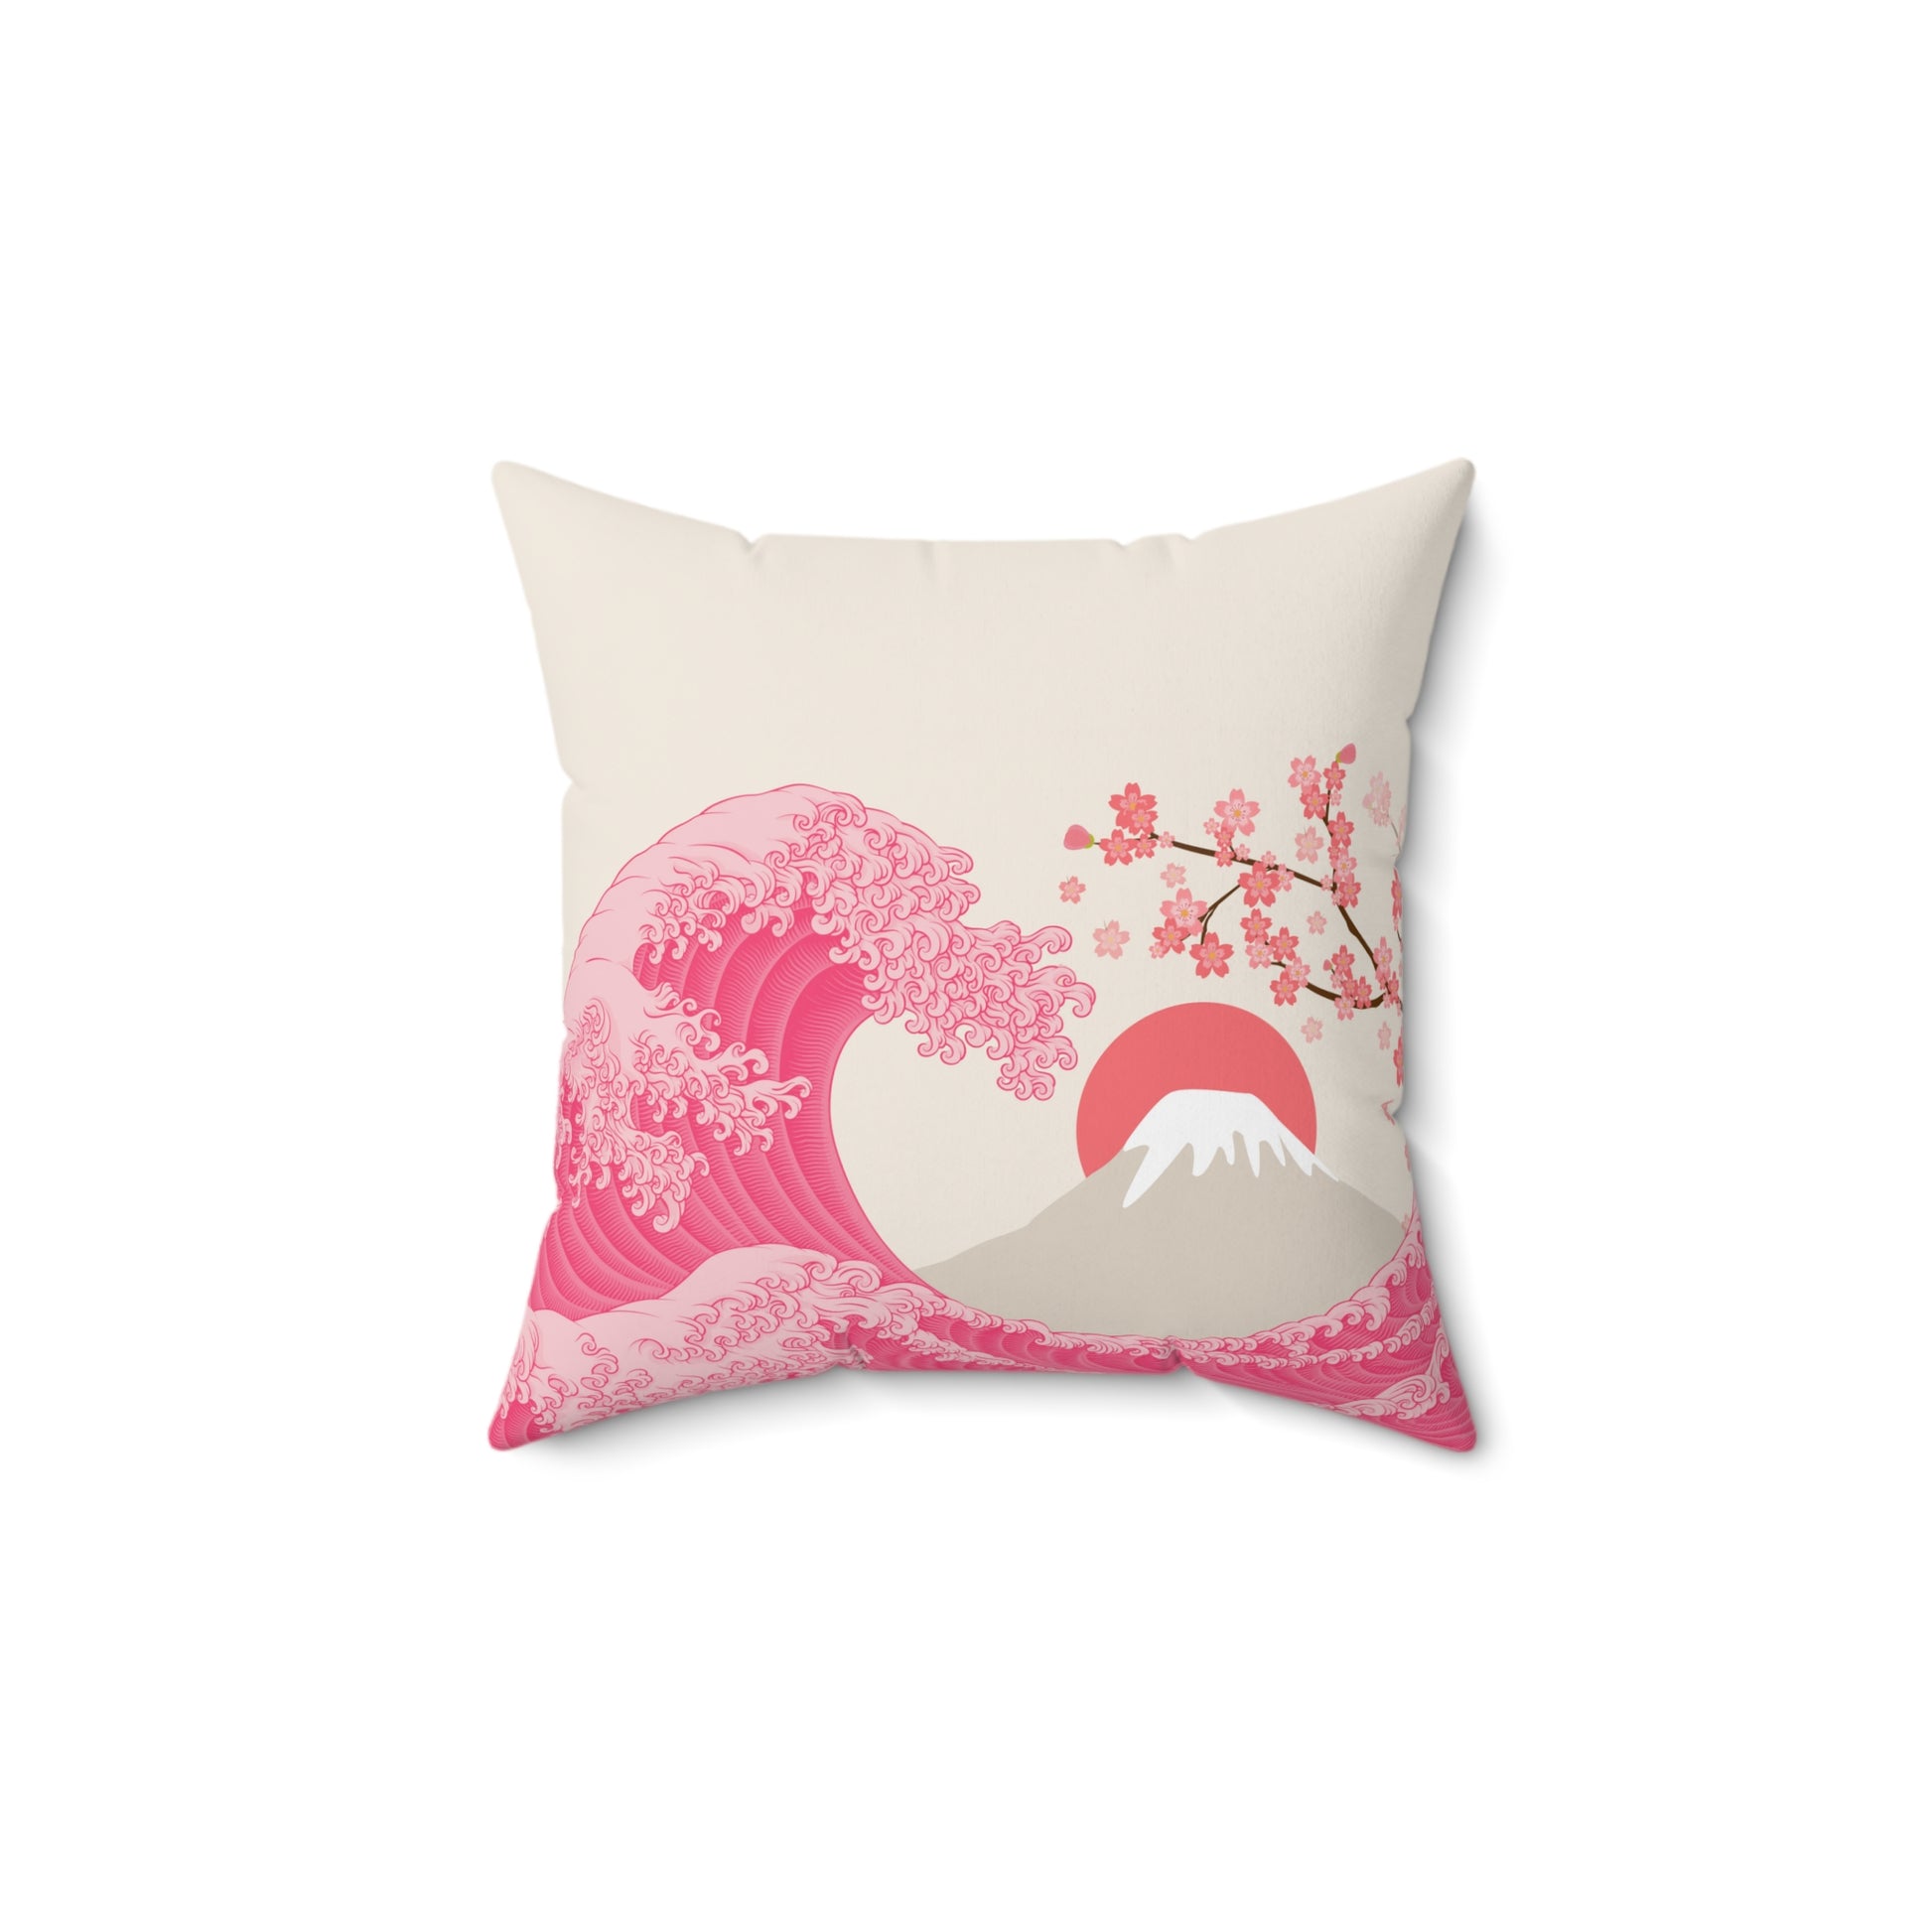 The Pink Great Wave Square Pillow